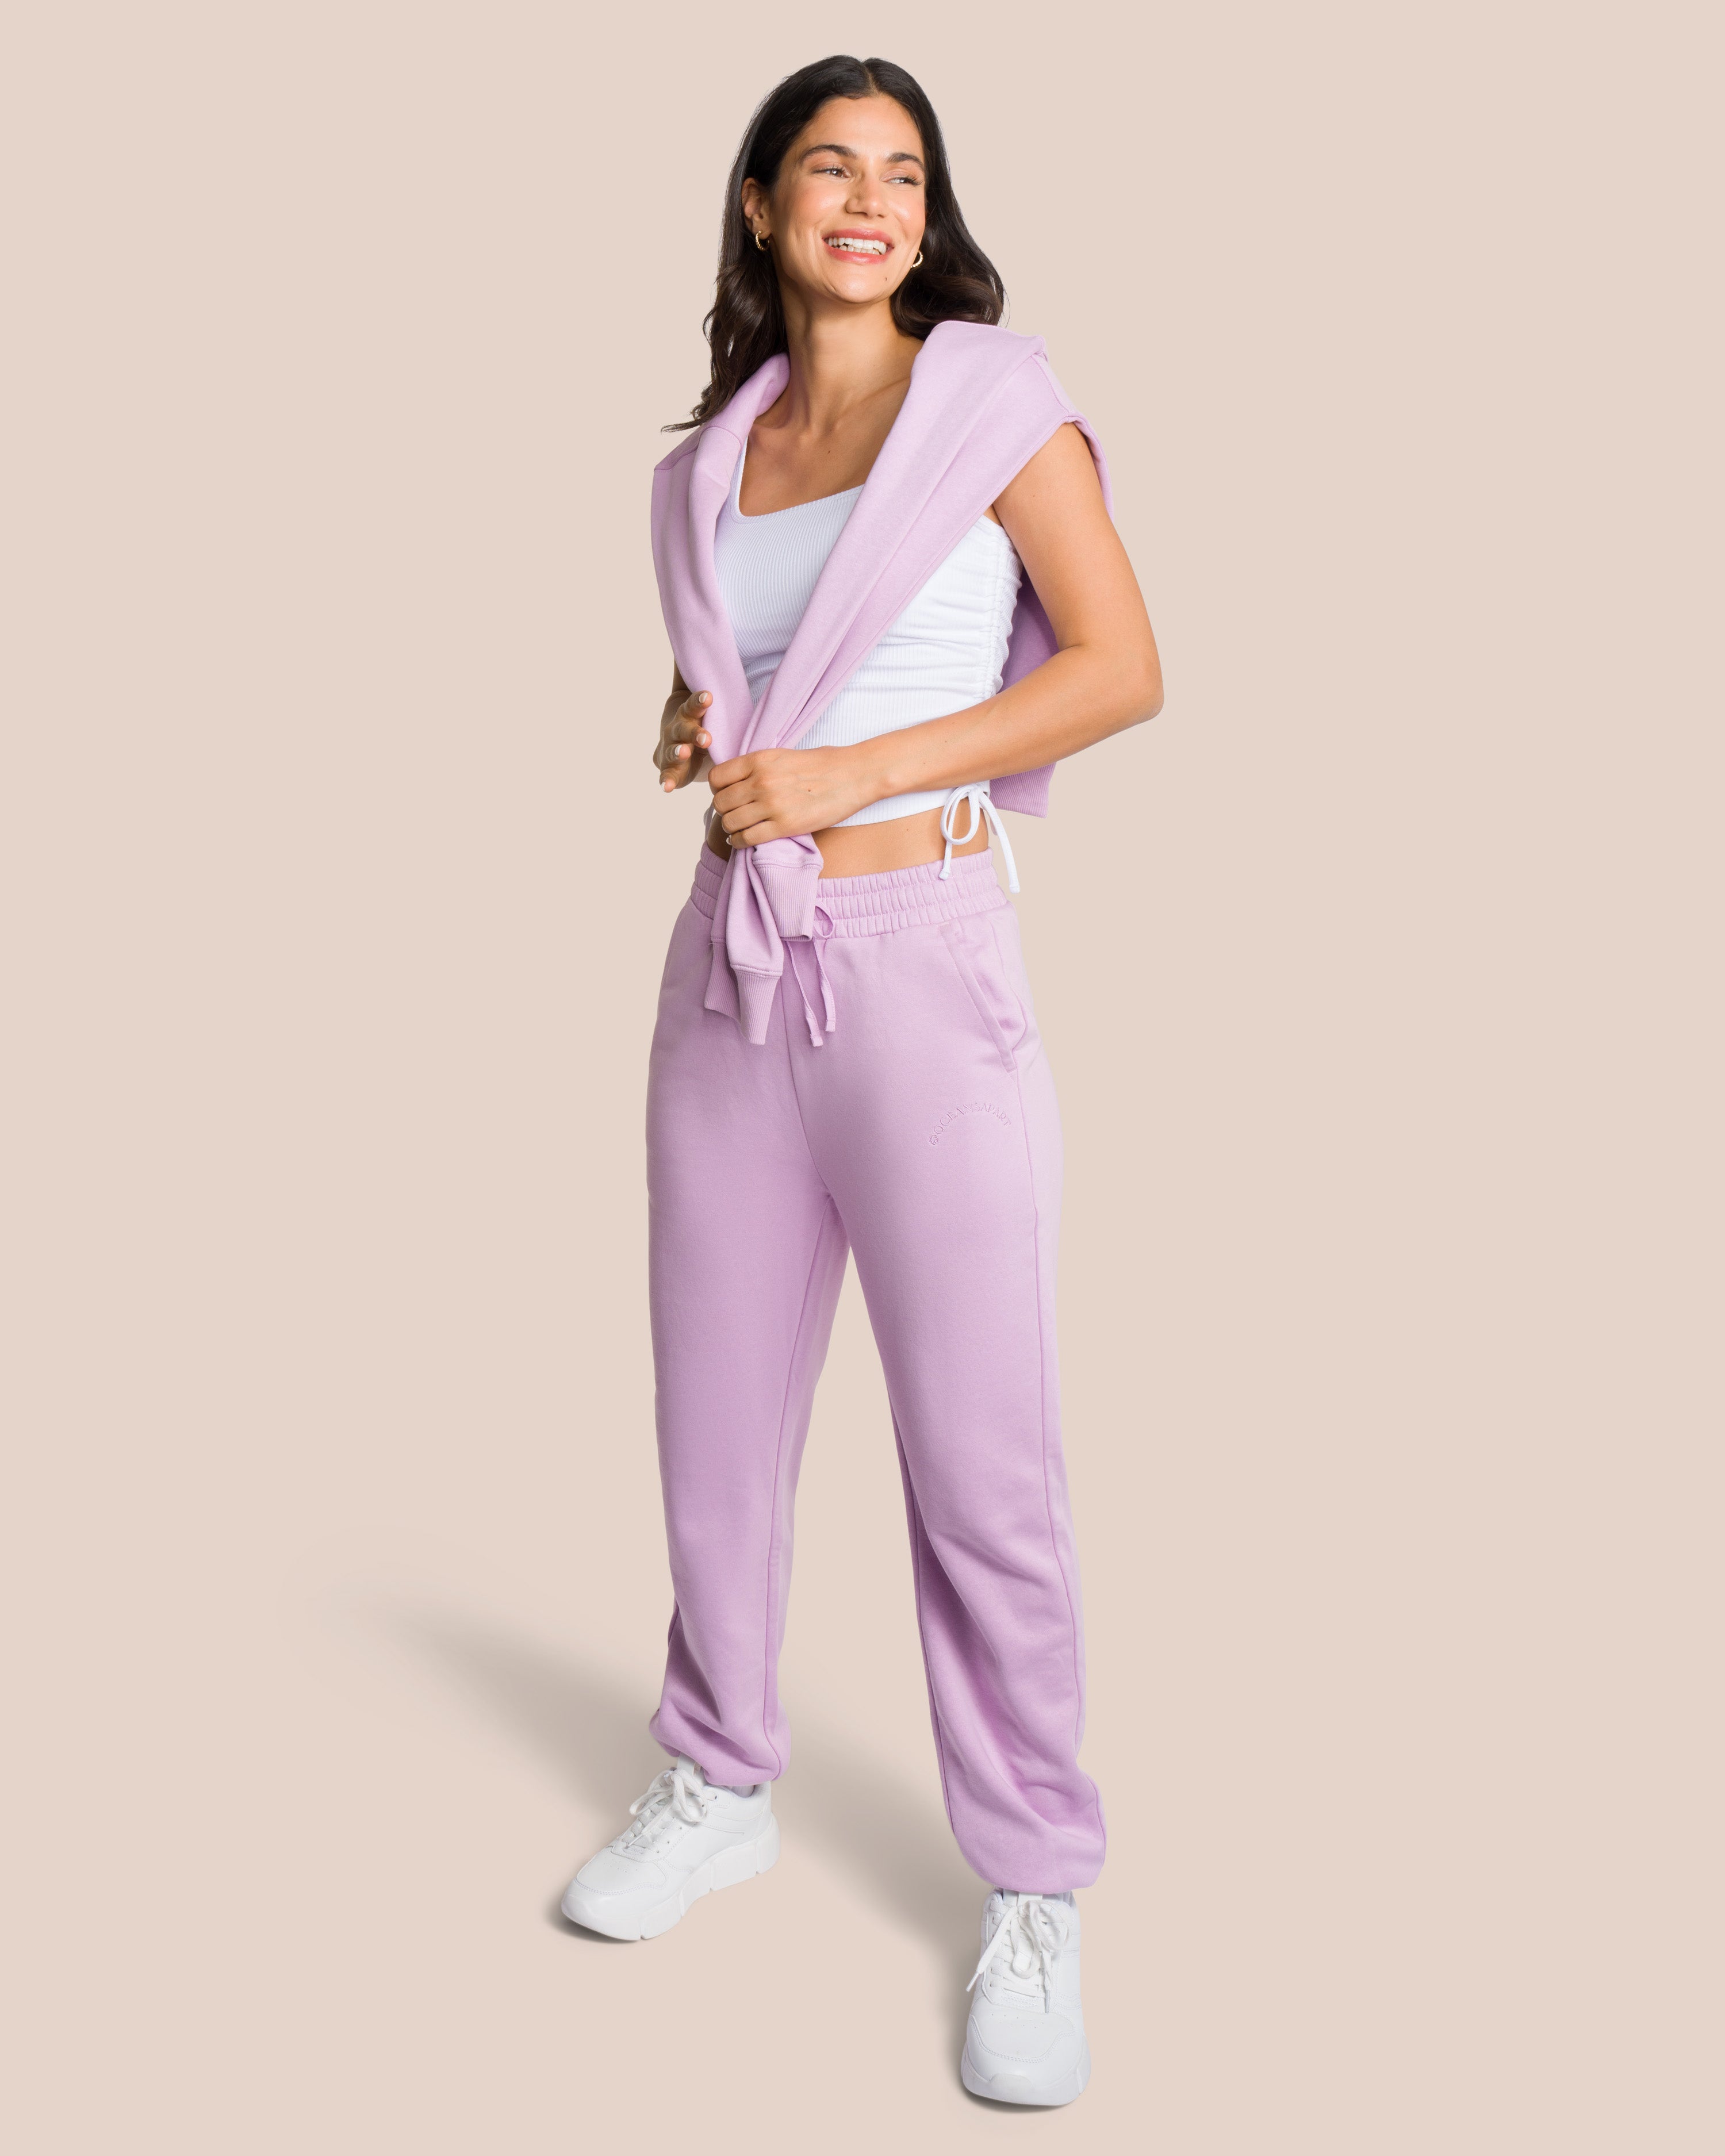 set-charly-sweat-deluxe-misty-lavender-white_01.jpg